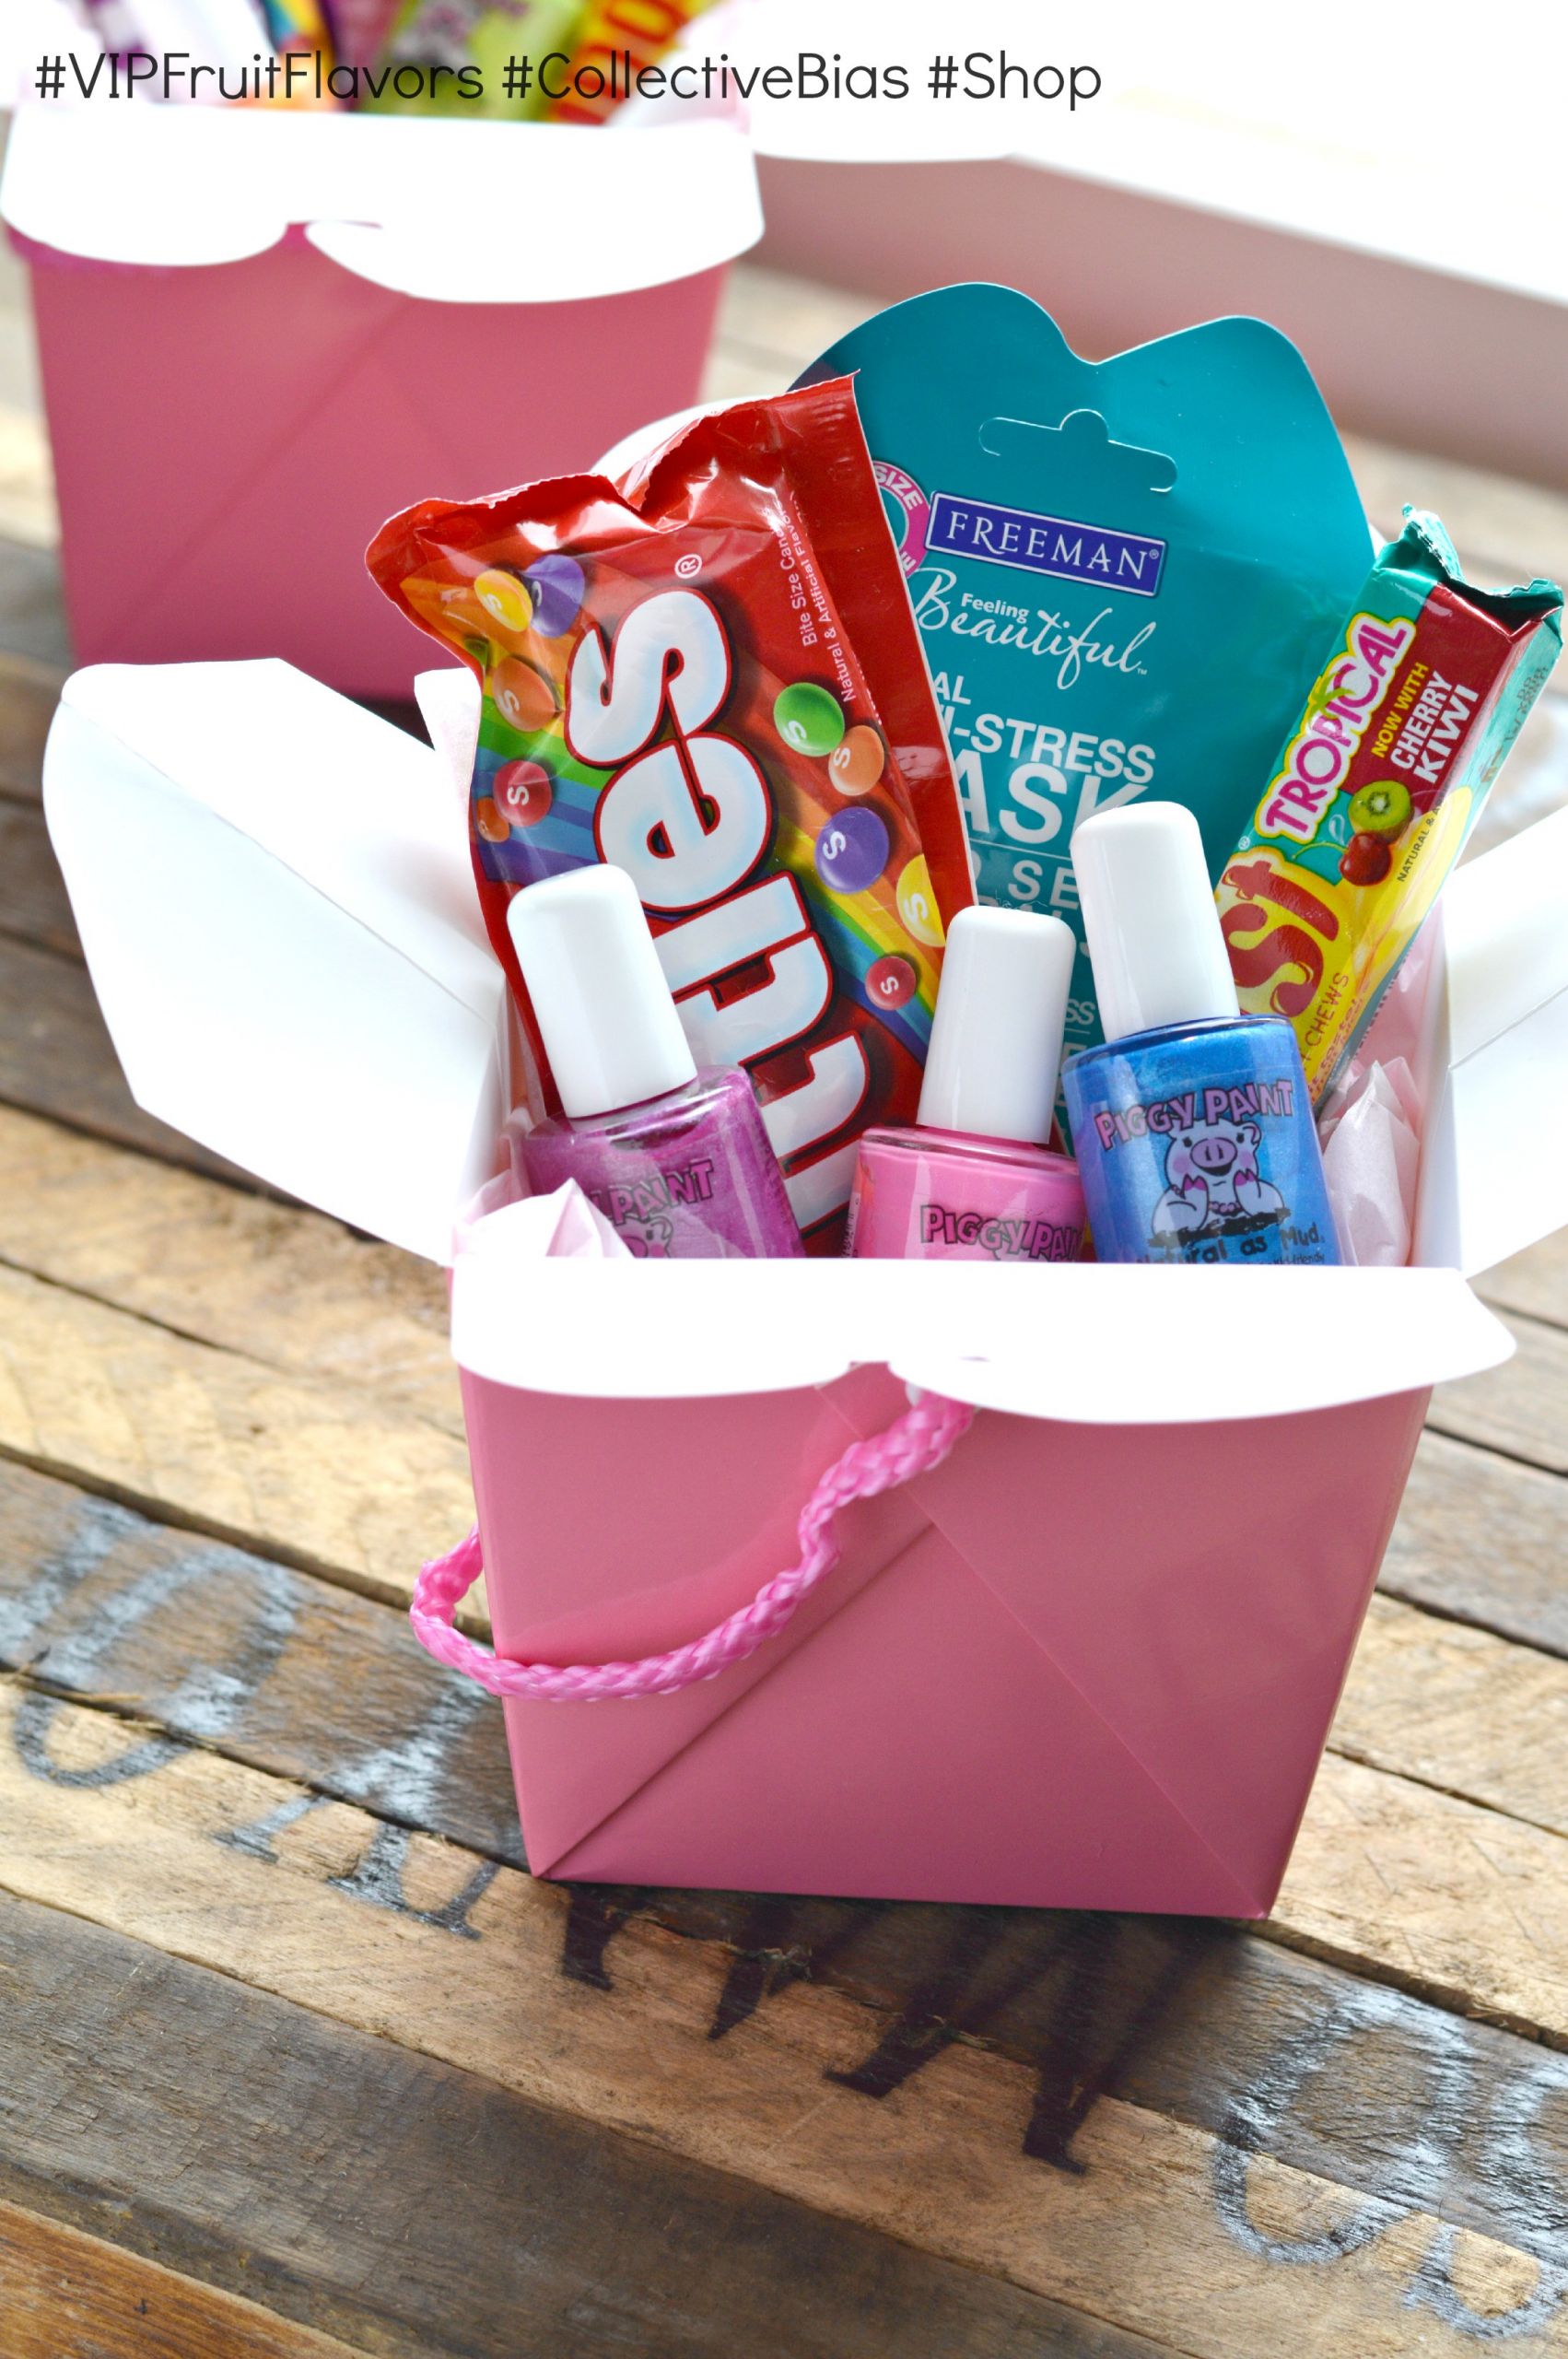 DIY Gifts For Birthday
 Skittles & Starburst Make For Awesome DIY Gifts It s